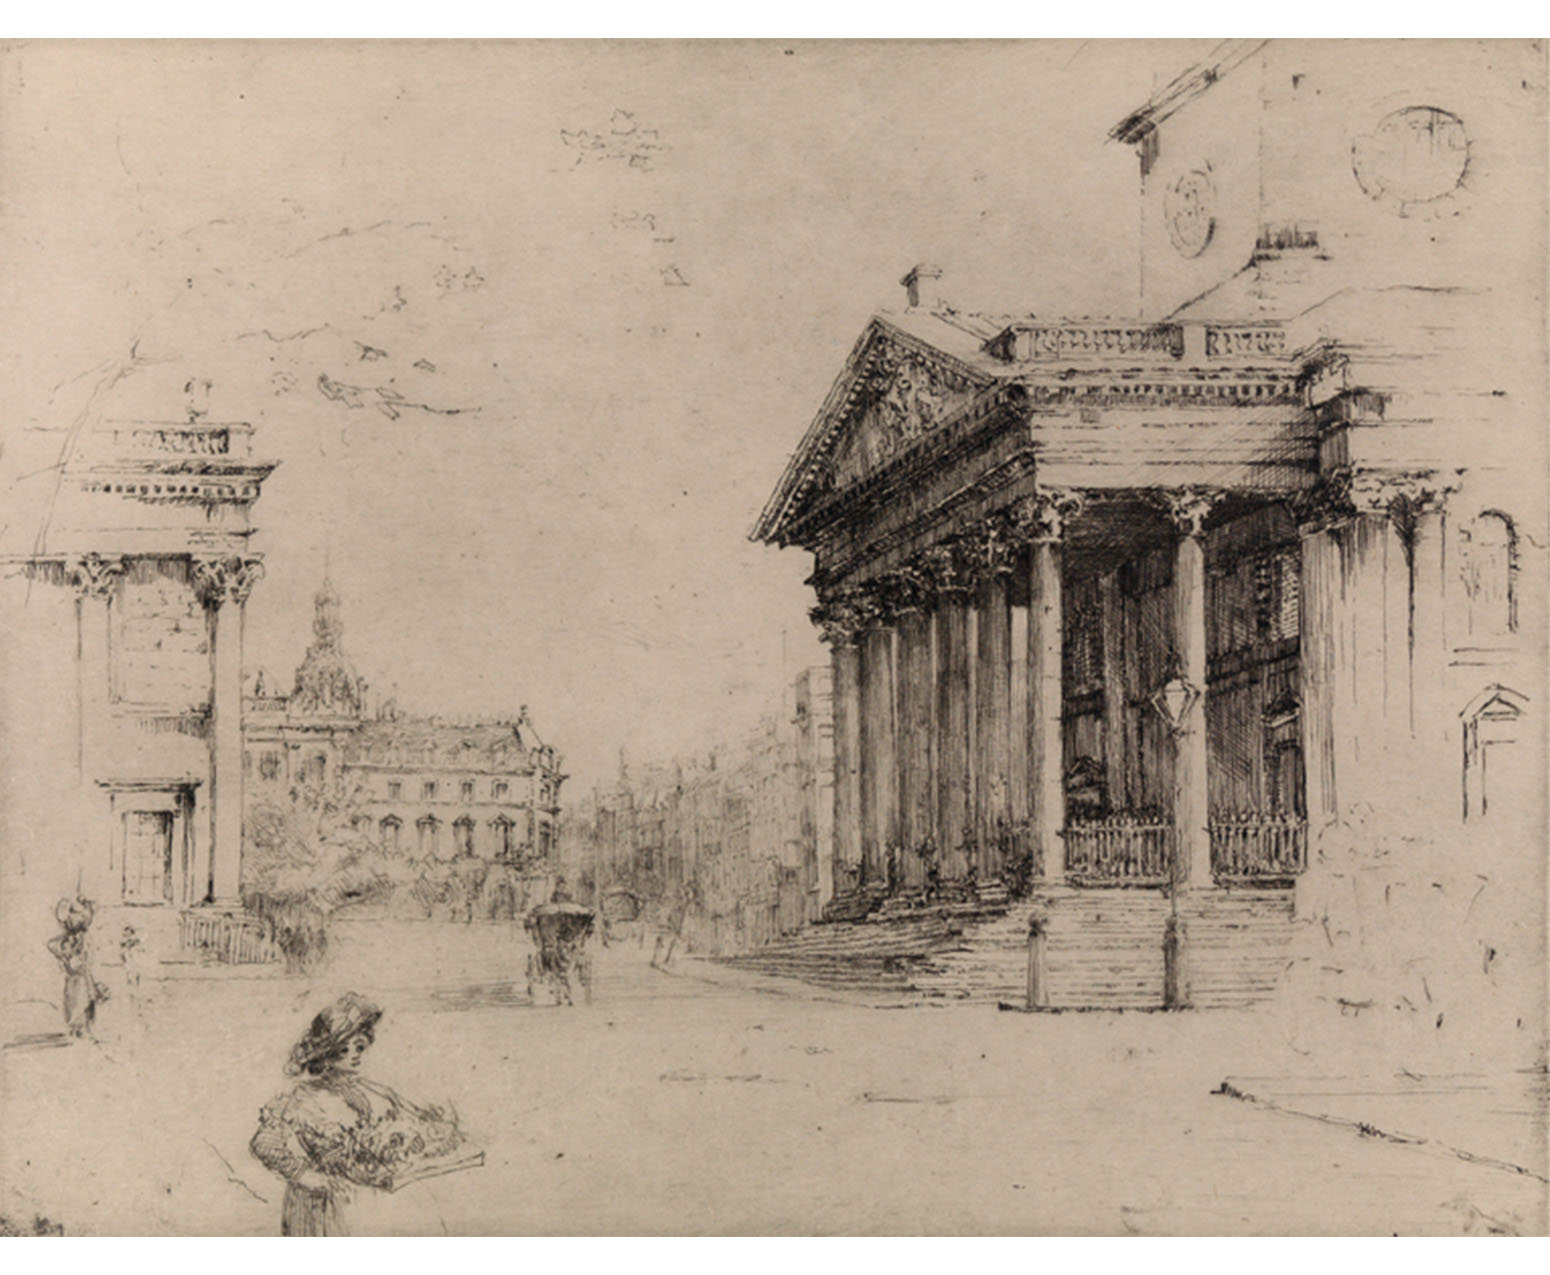 Square with Greco-Roman inspired facade with corinthean columns and a clock tower, and large manor in background. Female flower-seller walks through square.